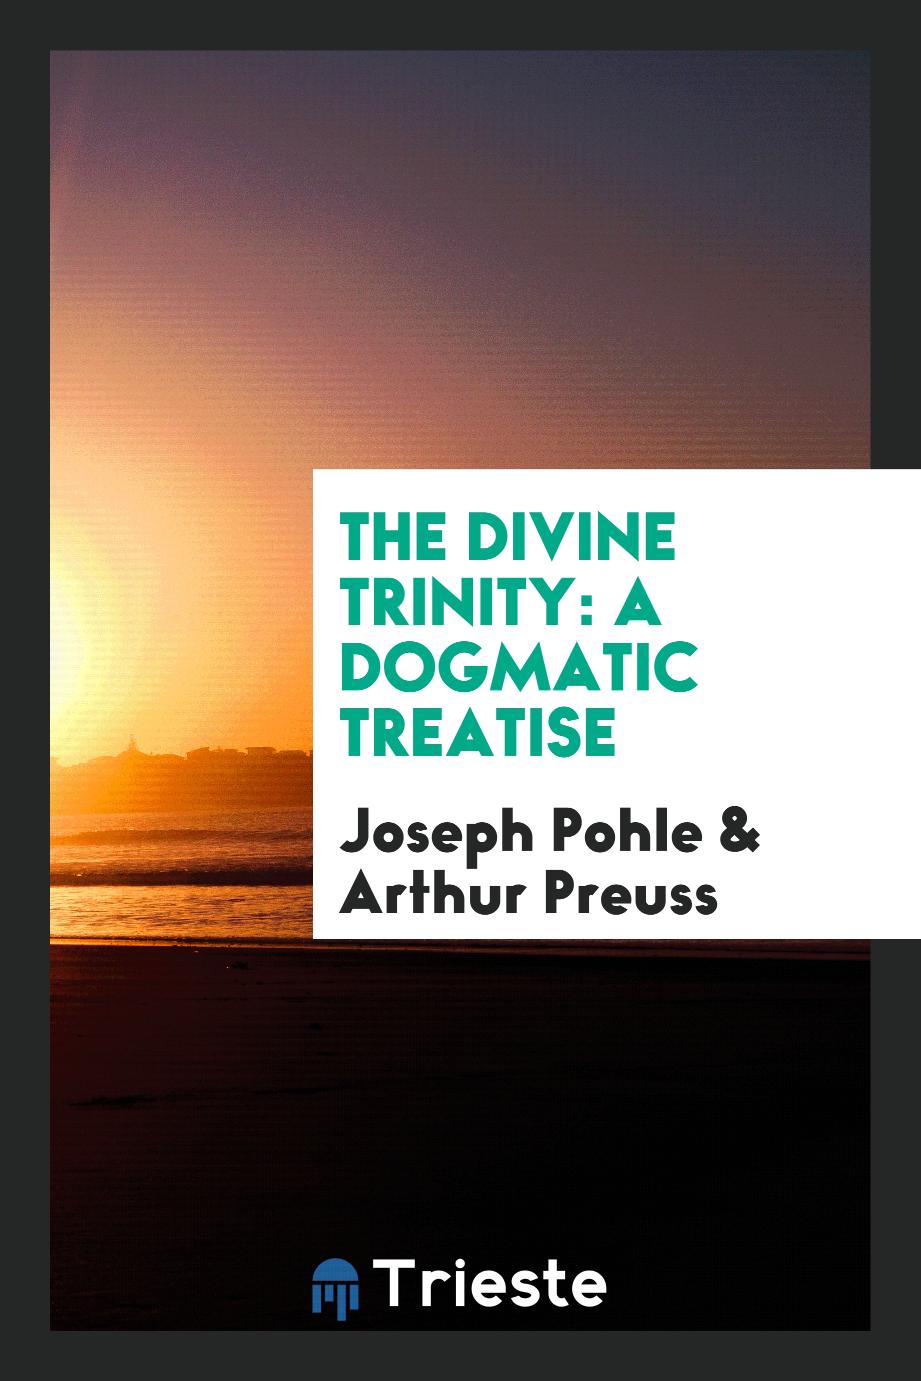 The Divine Trinity: A Dogmatic Treatise